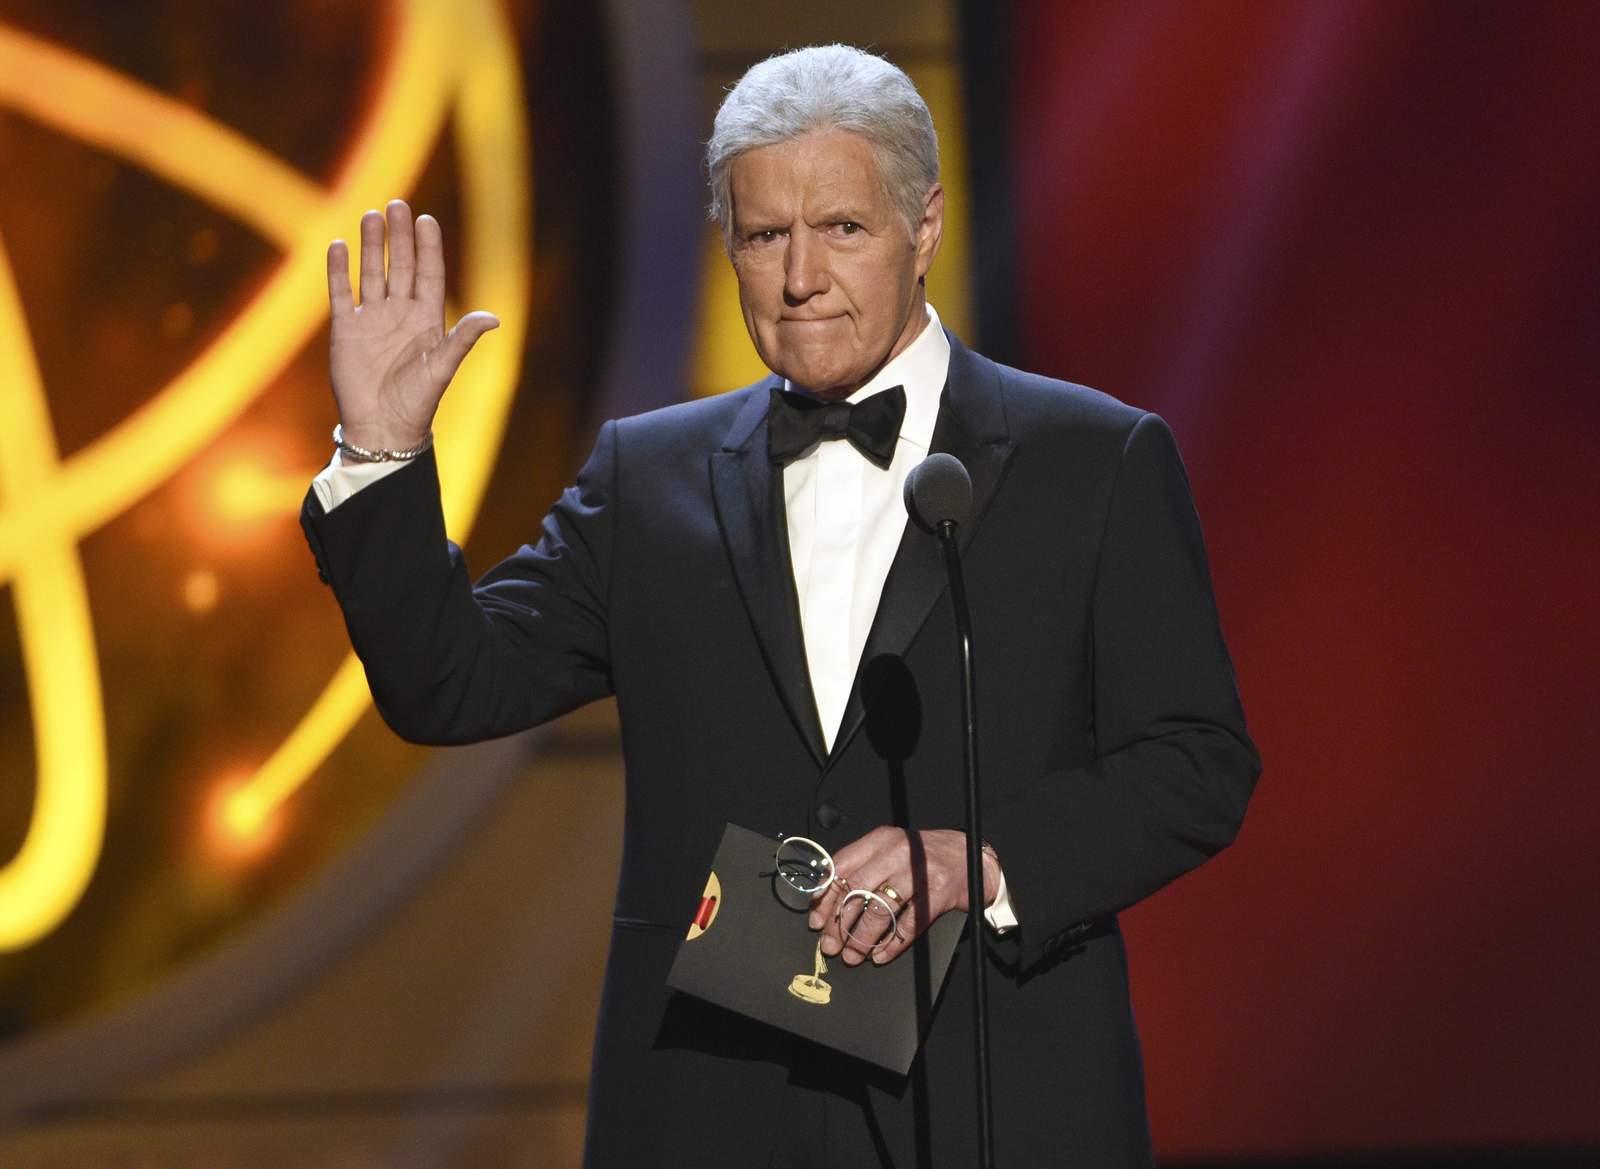 World mourns the loss of Alex Trebek after more than 30 years of trivia stardom